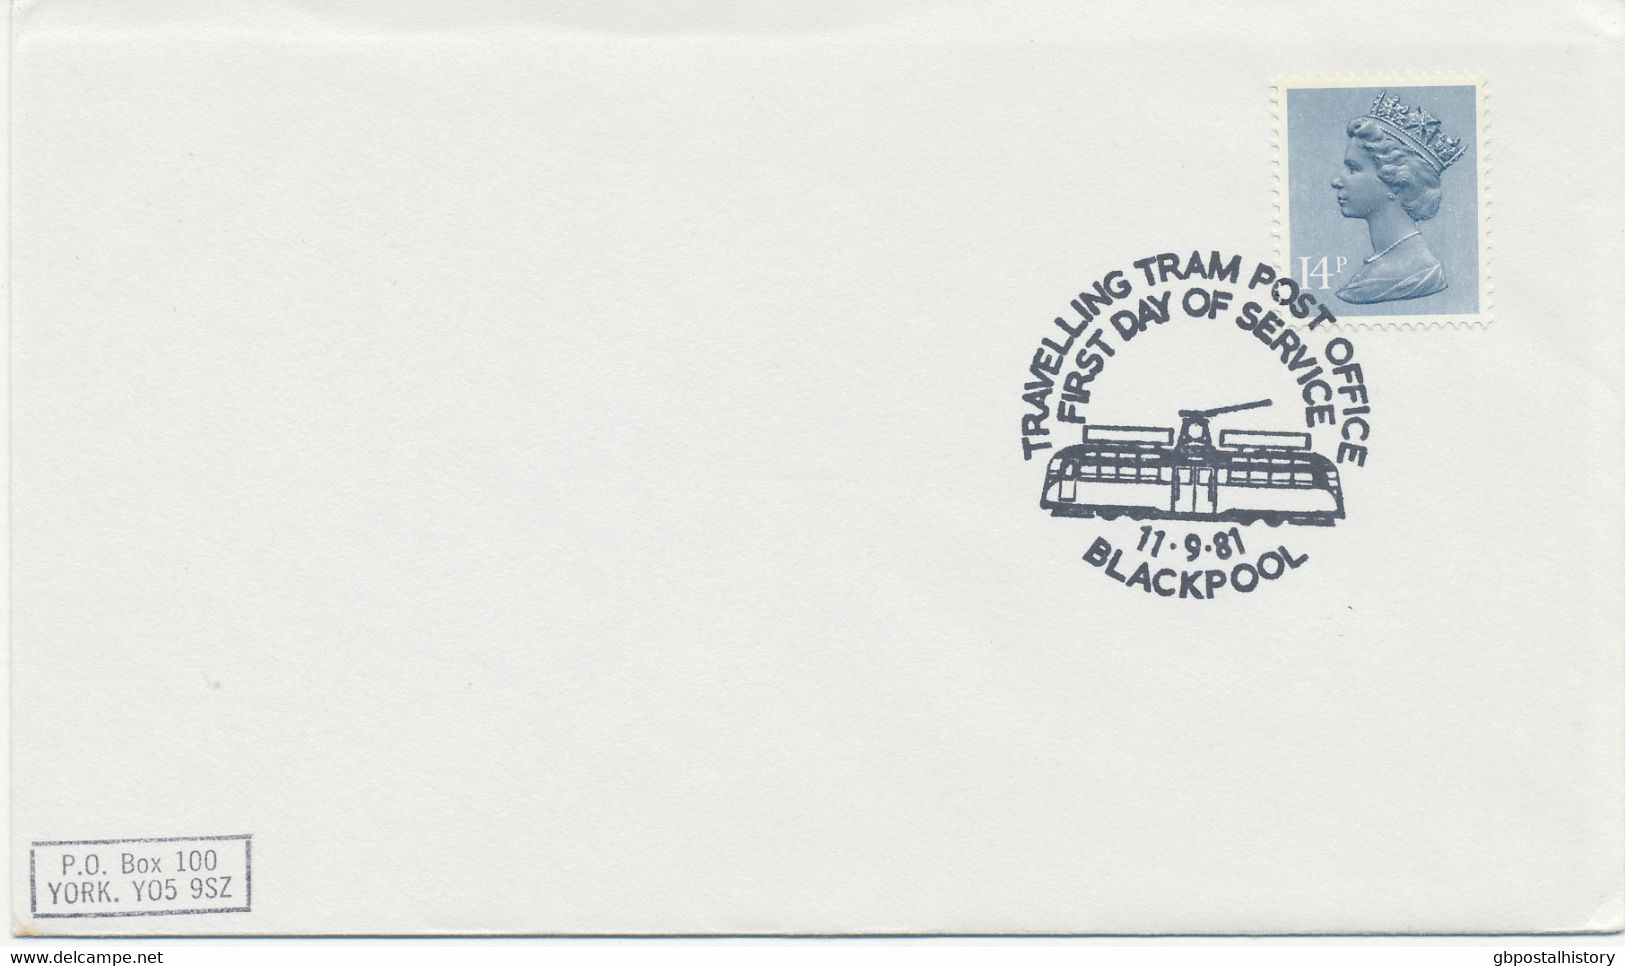 GB SPECIAL EVENT POSTMARK TRAVELLING TRAM POST OFFICE - FIRST DAY Of SERVICE - 11-9-81 BLACKPOOL - Worlds First Post Off - Tram